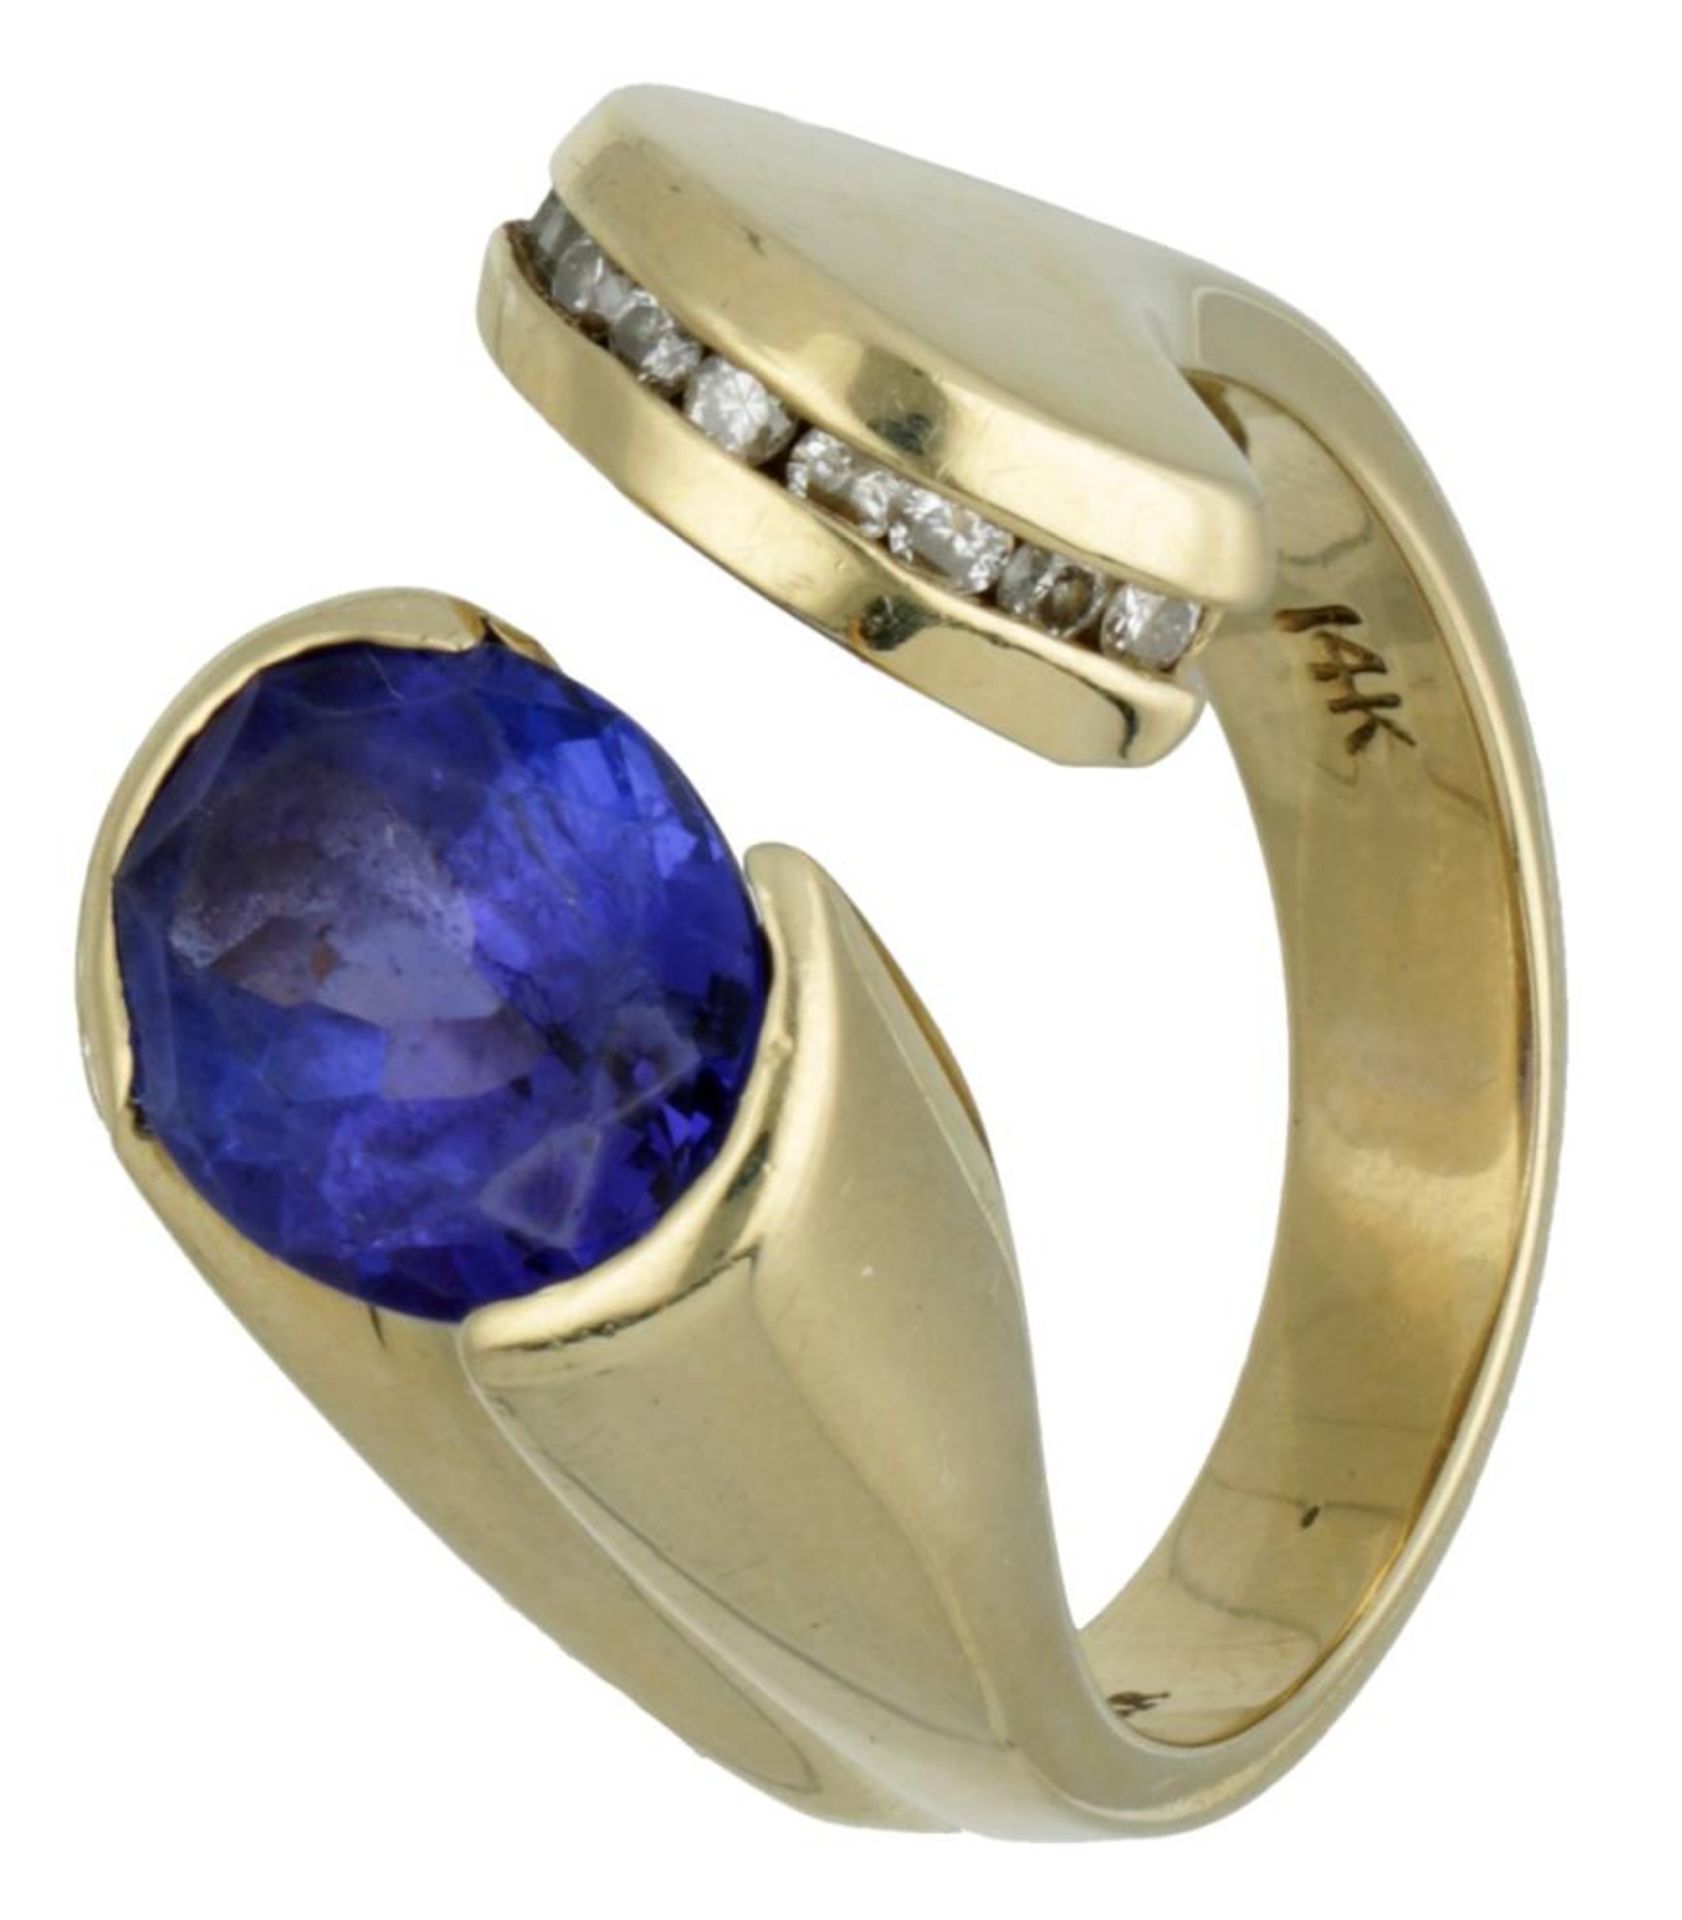 14K. Yellow gold ring set with approx. 0.11 ct. diamond and approx. 2.01 ct. iolite.